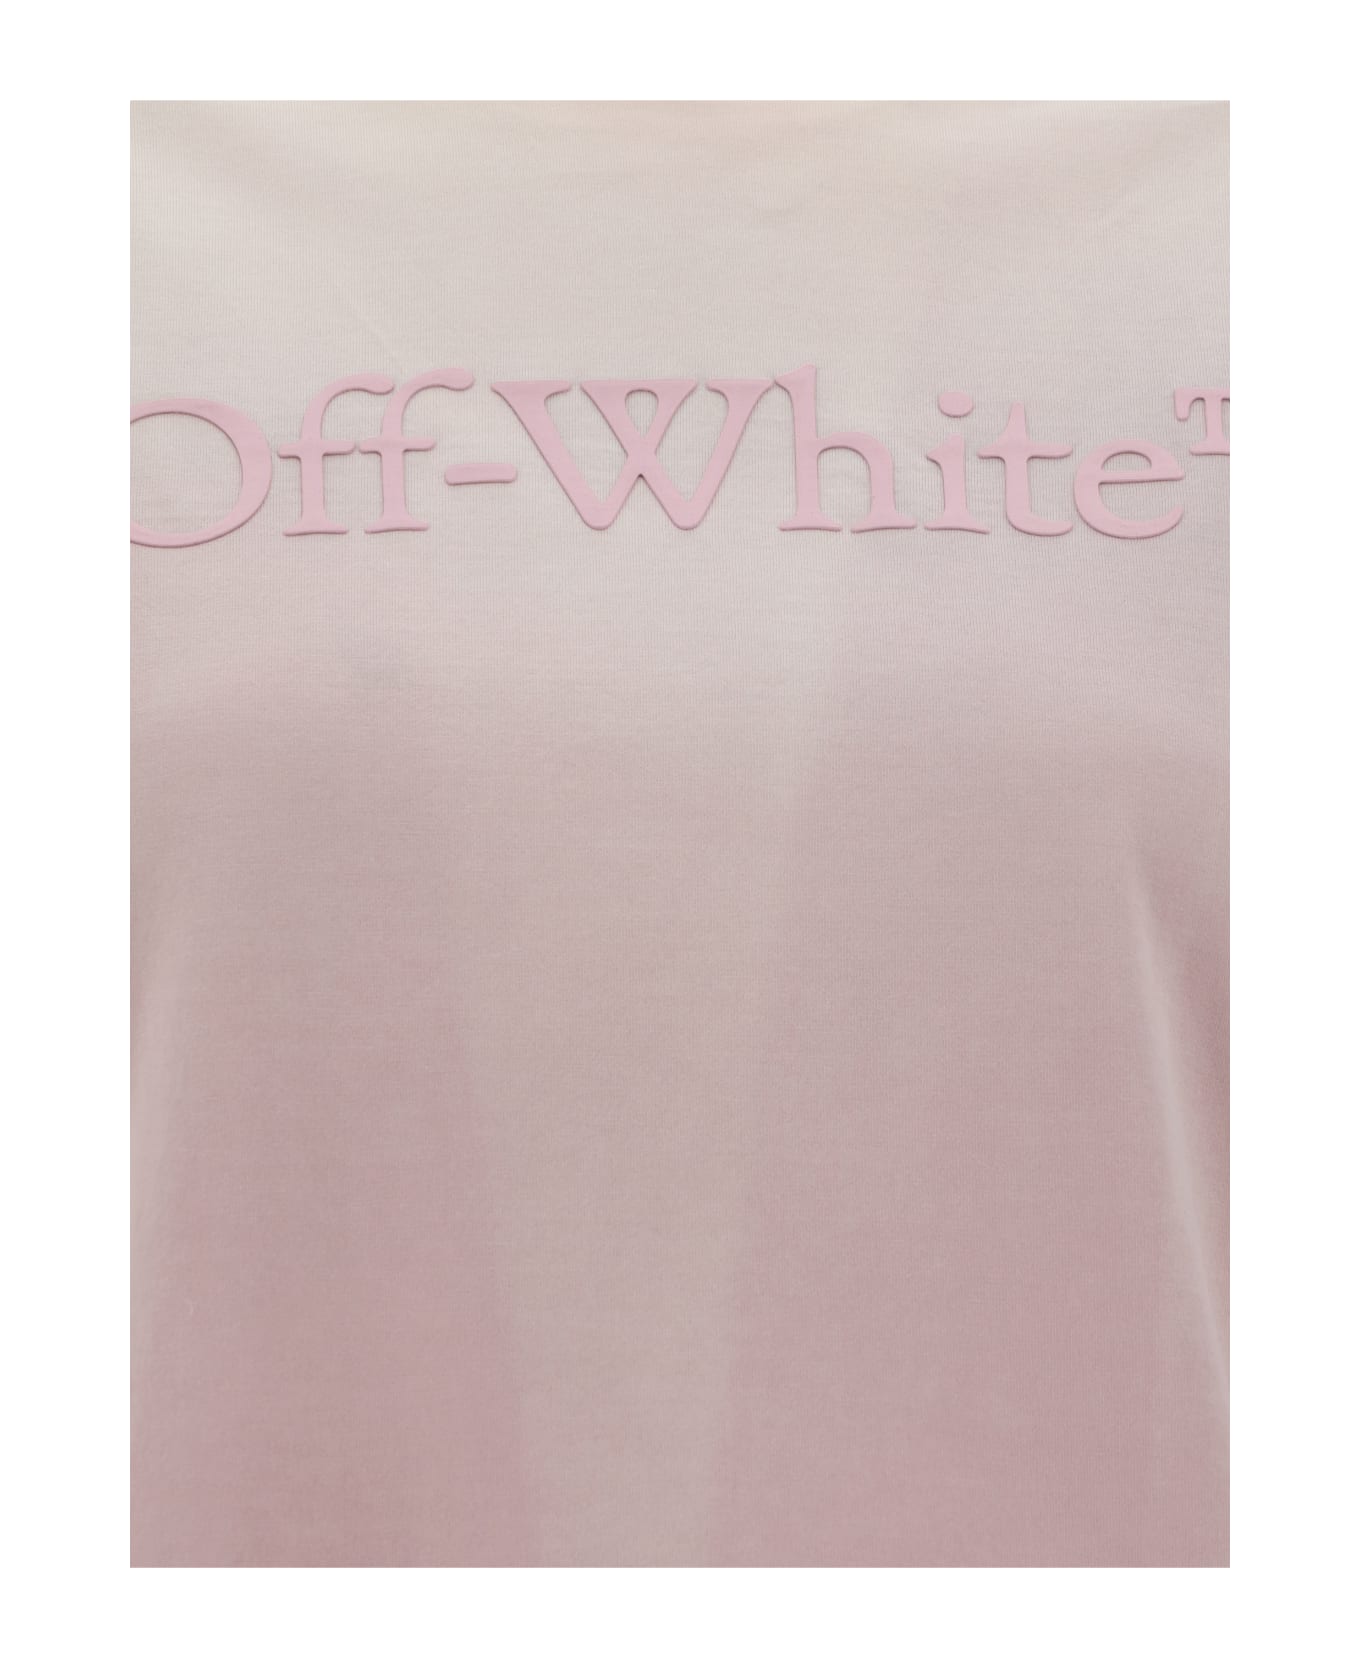 Off-White Laundry Casual T-shirt - Burnished Lilac Burnished Lilac